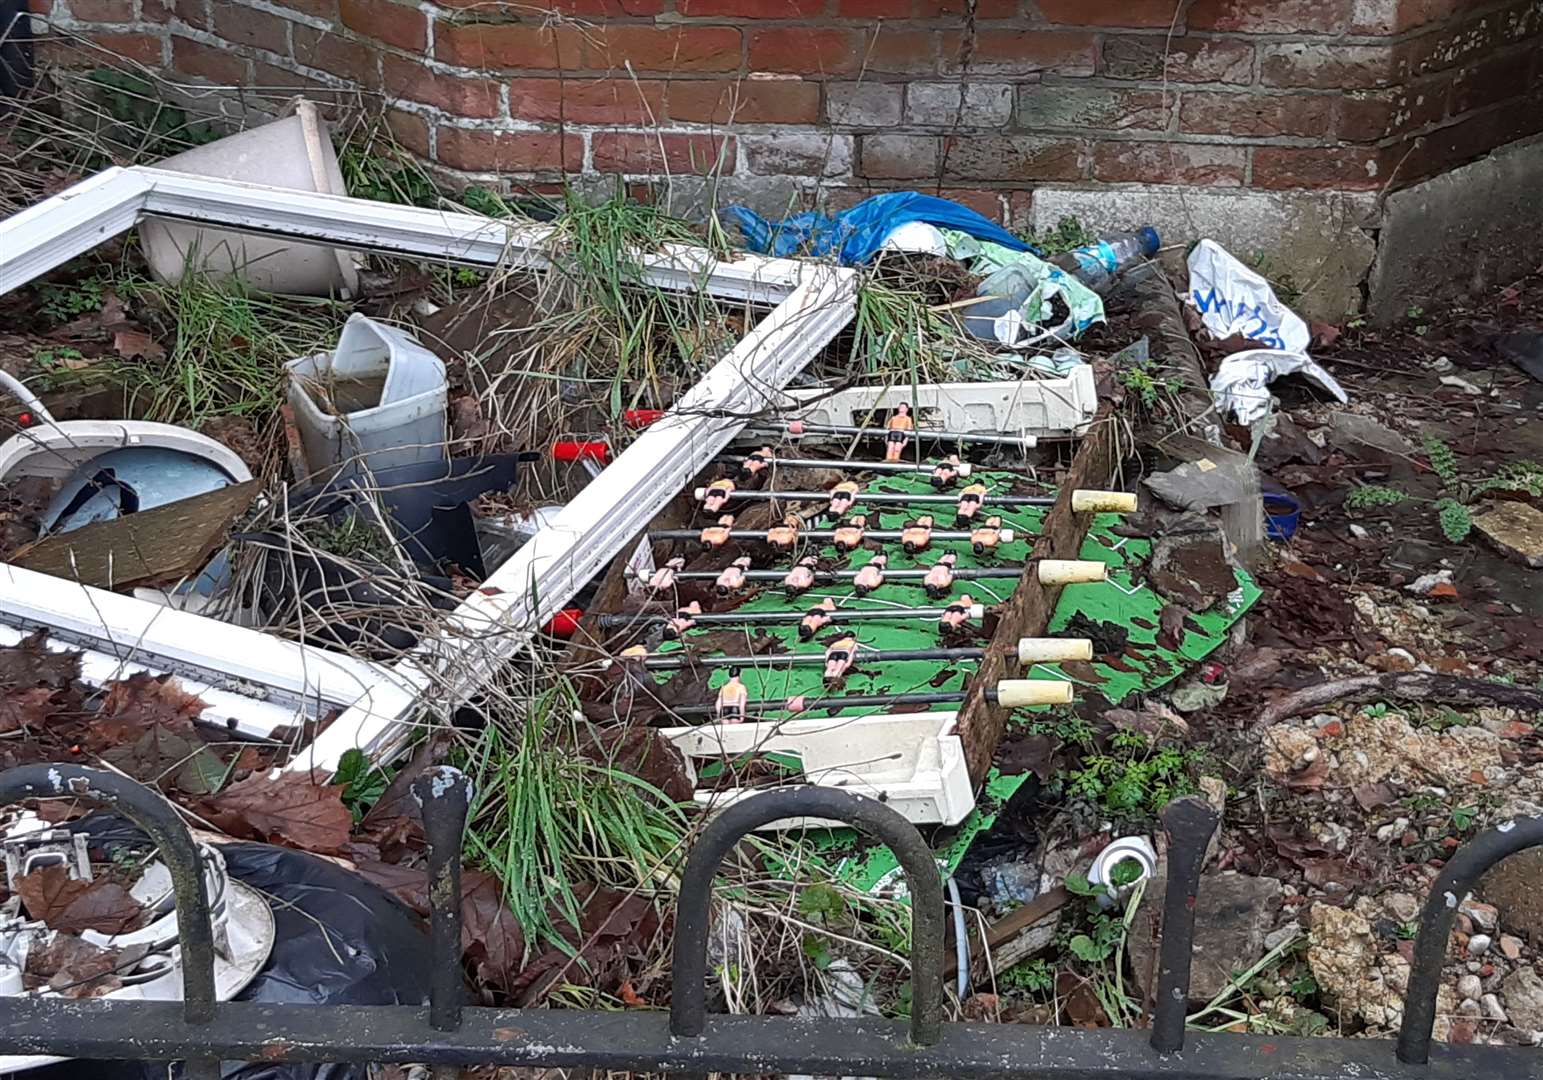 An abandoned tabletop football set in the front garden